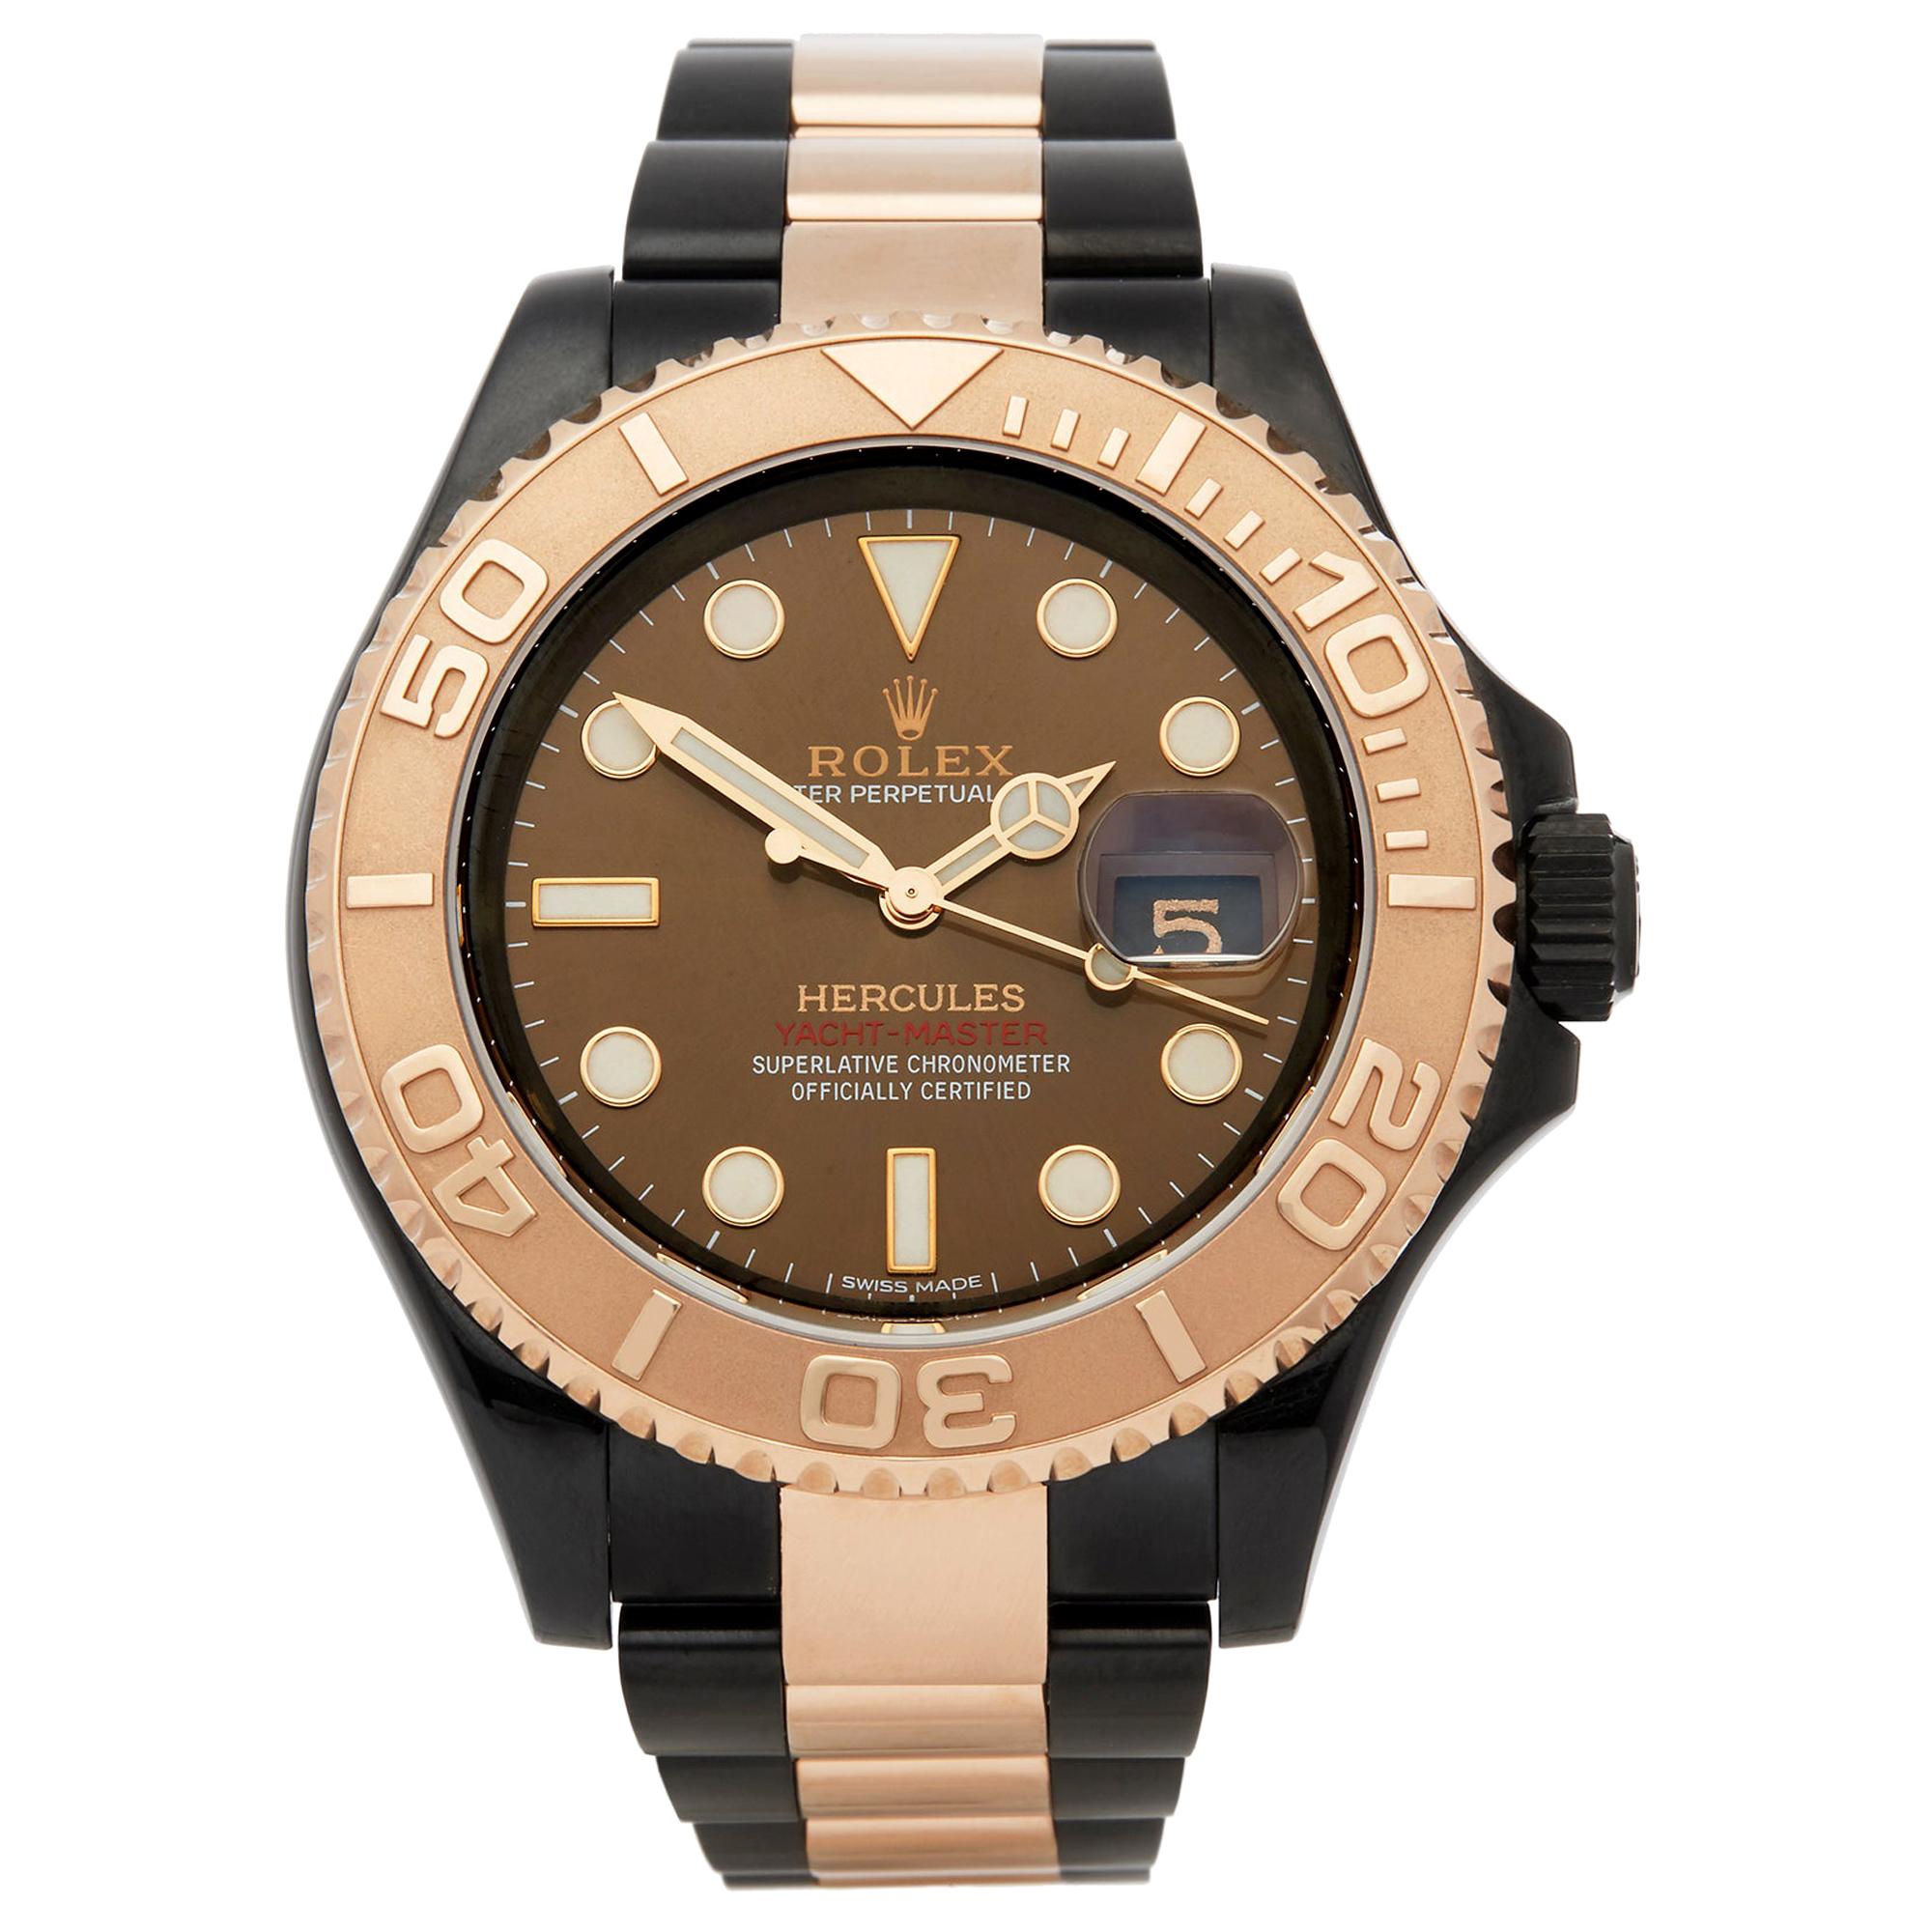 Rolex Yacht-Master Hercules Dlc Coated Stainless Steel and 18 Karat Gold 116621